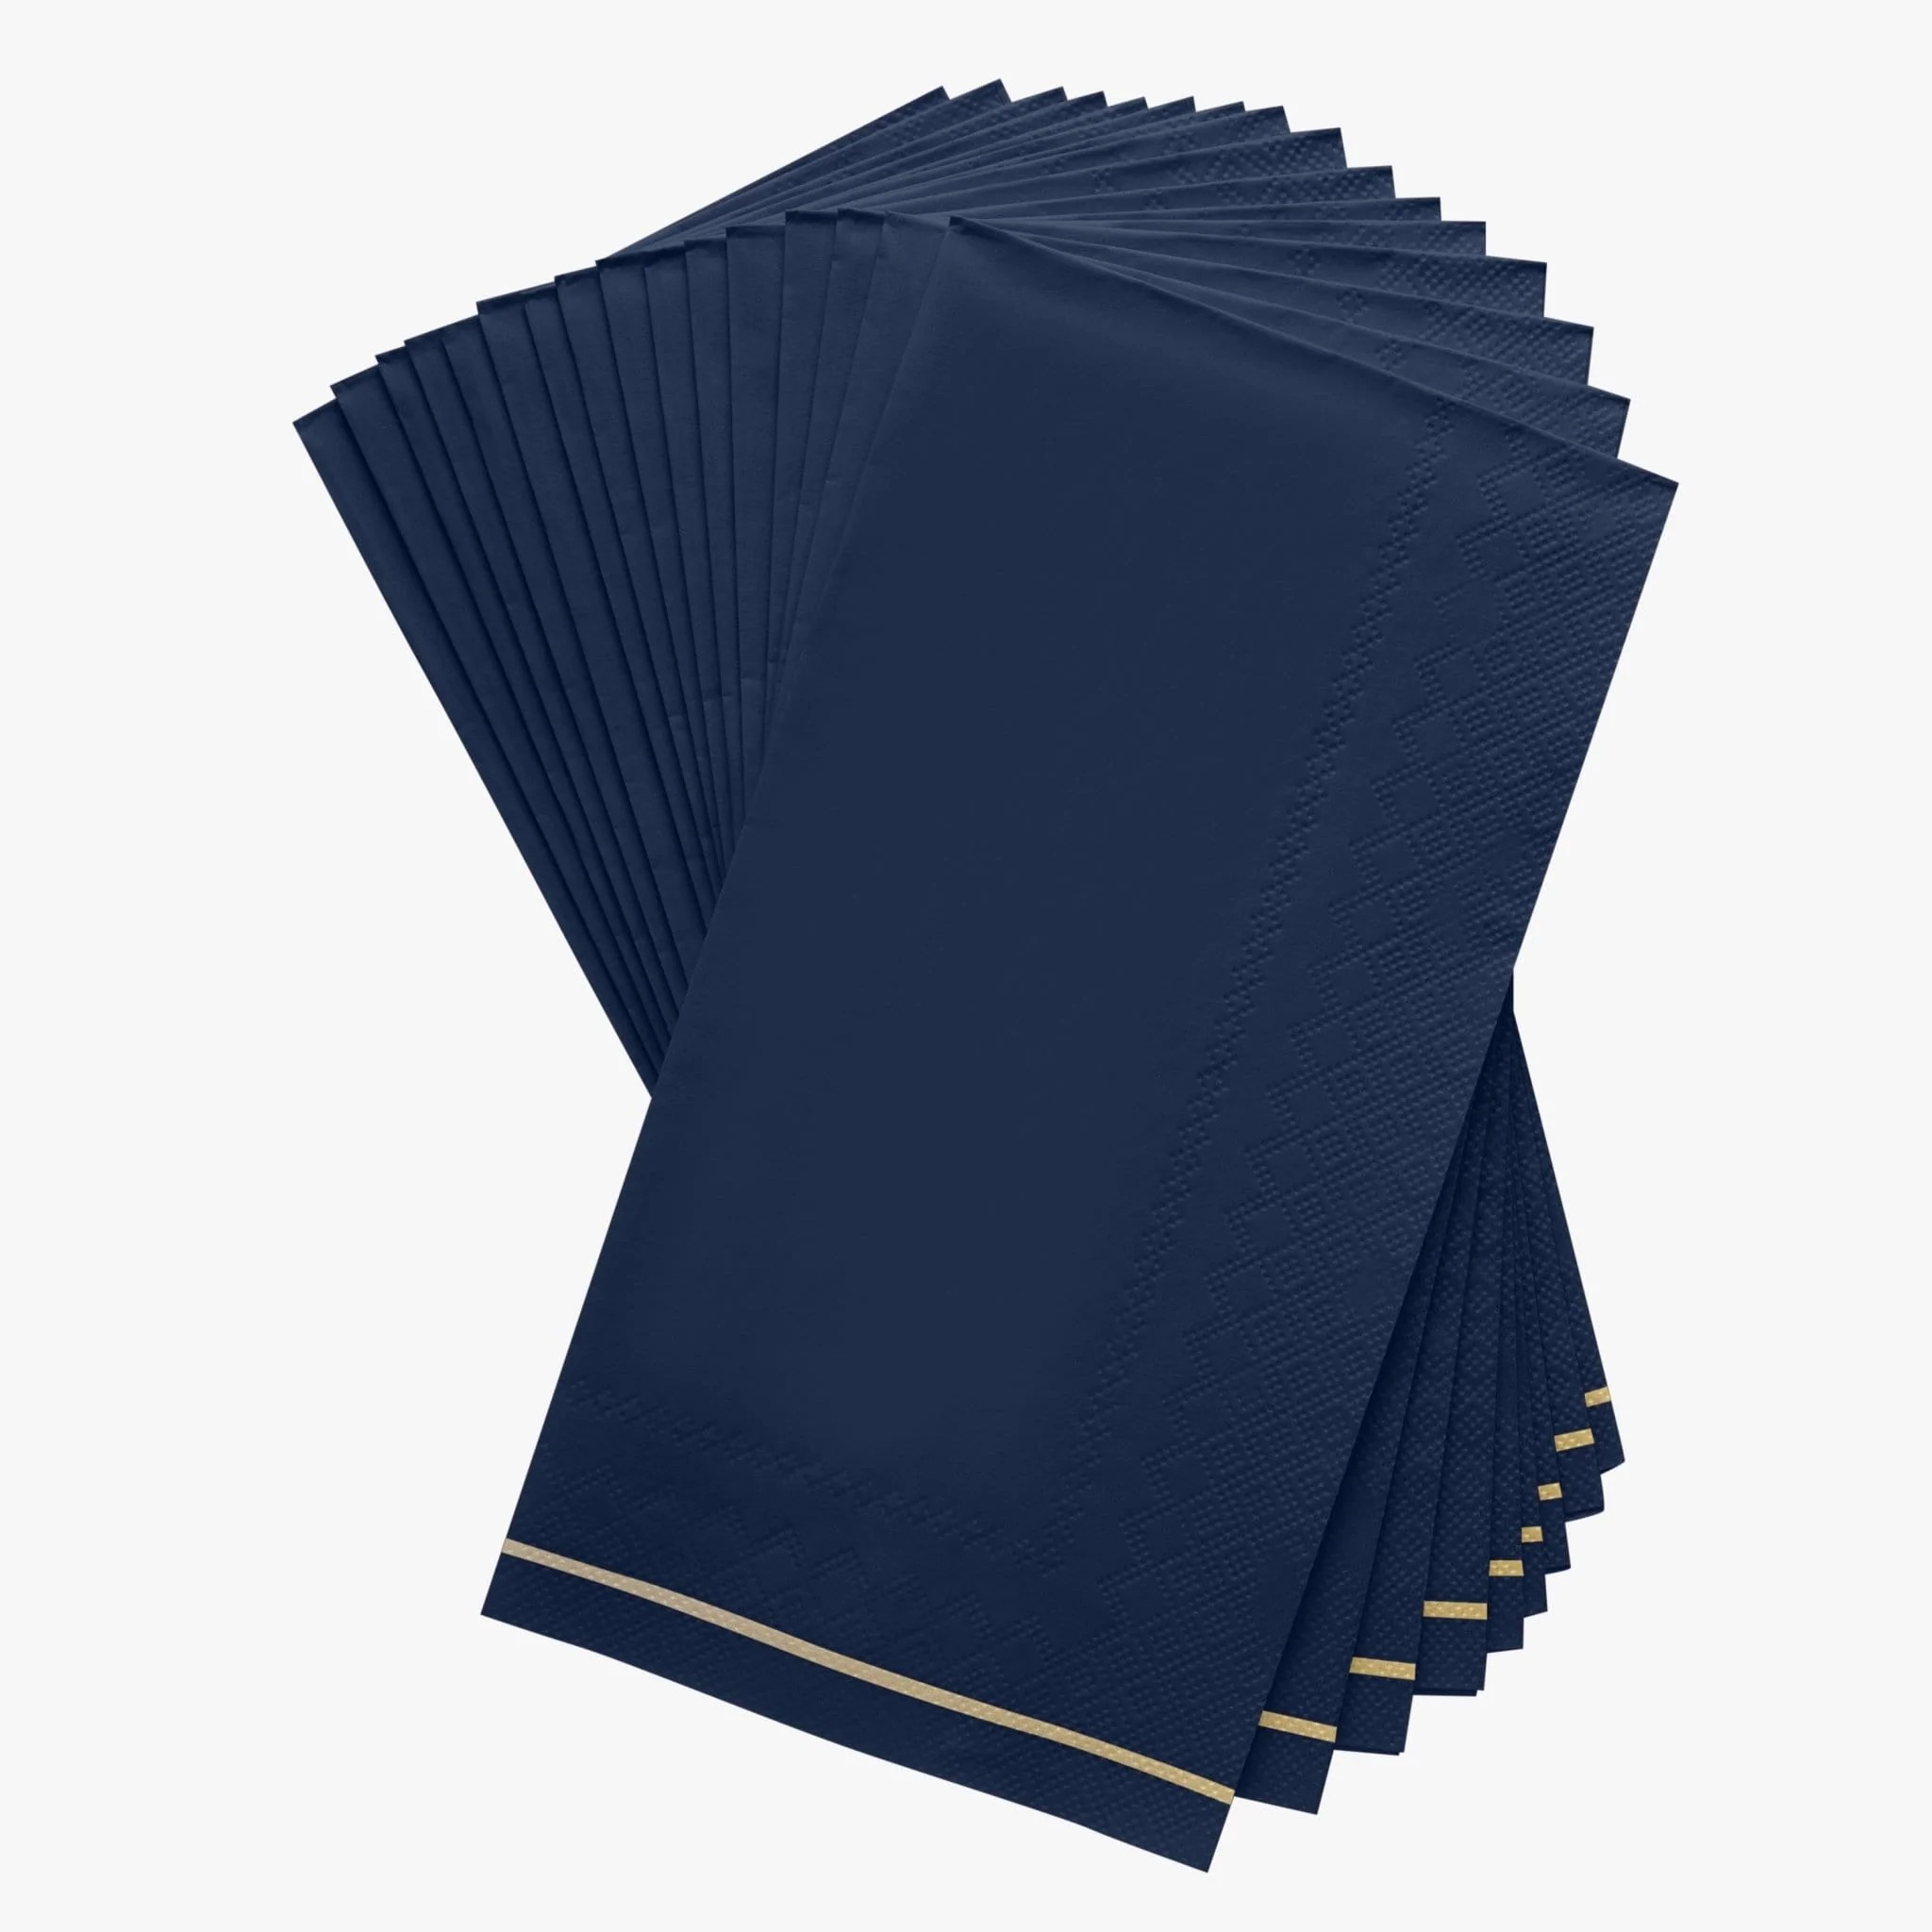 Luxe Party Navy with Gold Stripe Dinner Napkins - 16 pcs